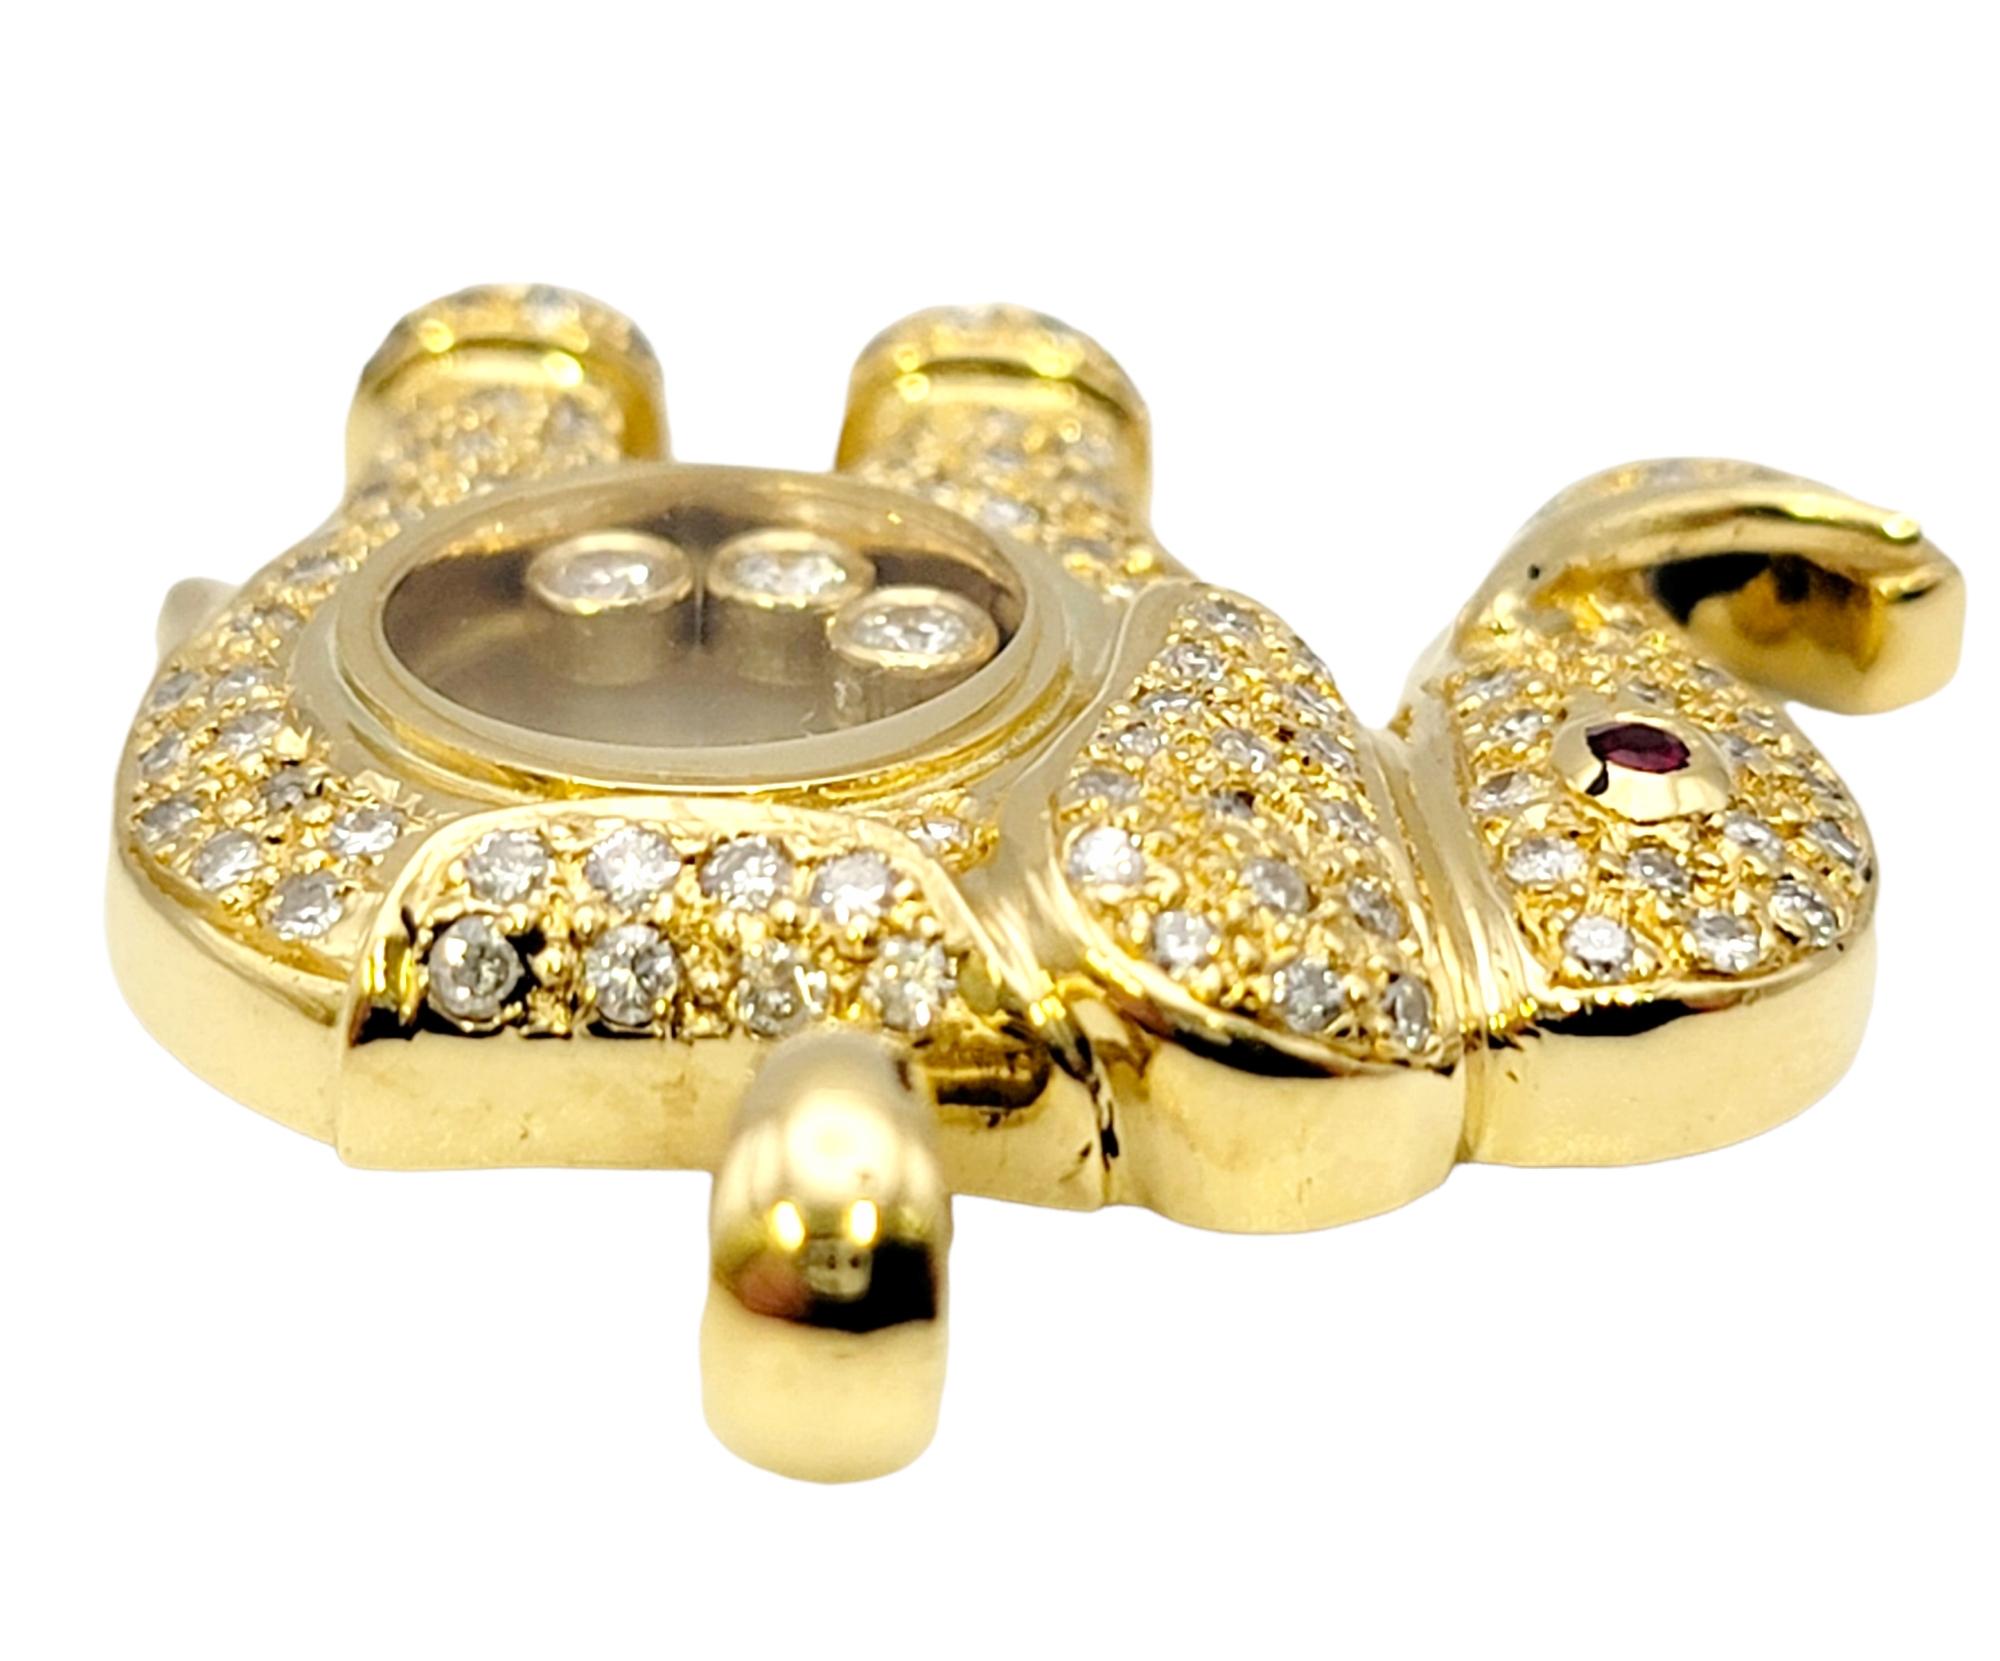 Floating Diamond and Pave Elephant Pendant with Ruby Eye in 18 Karat Yellow Gold 1